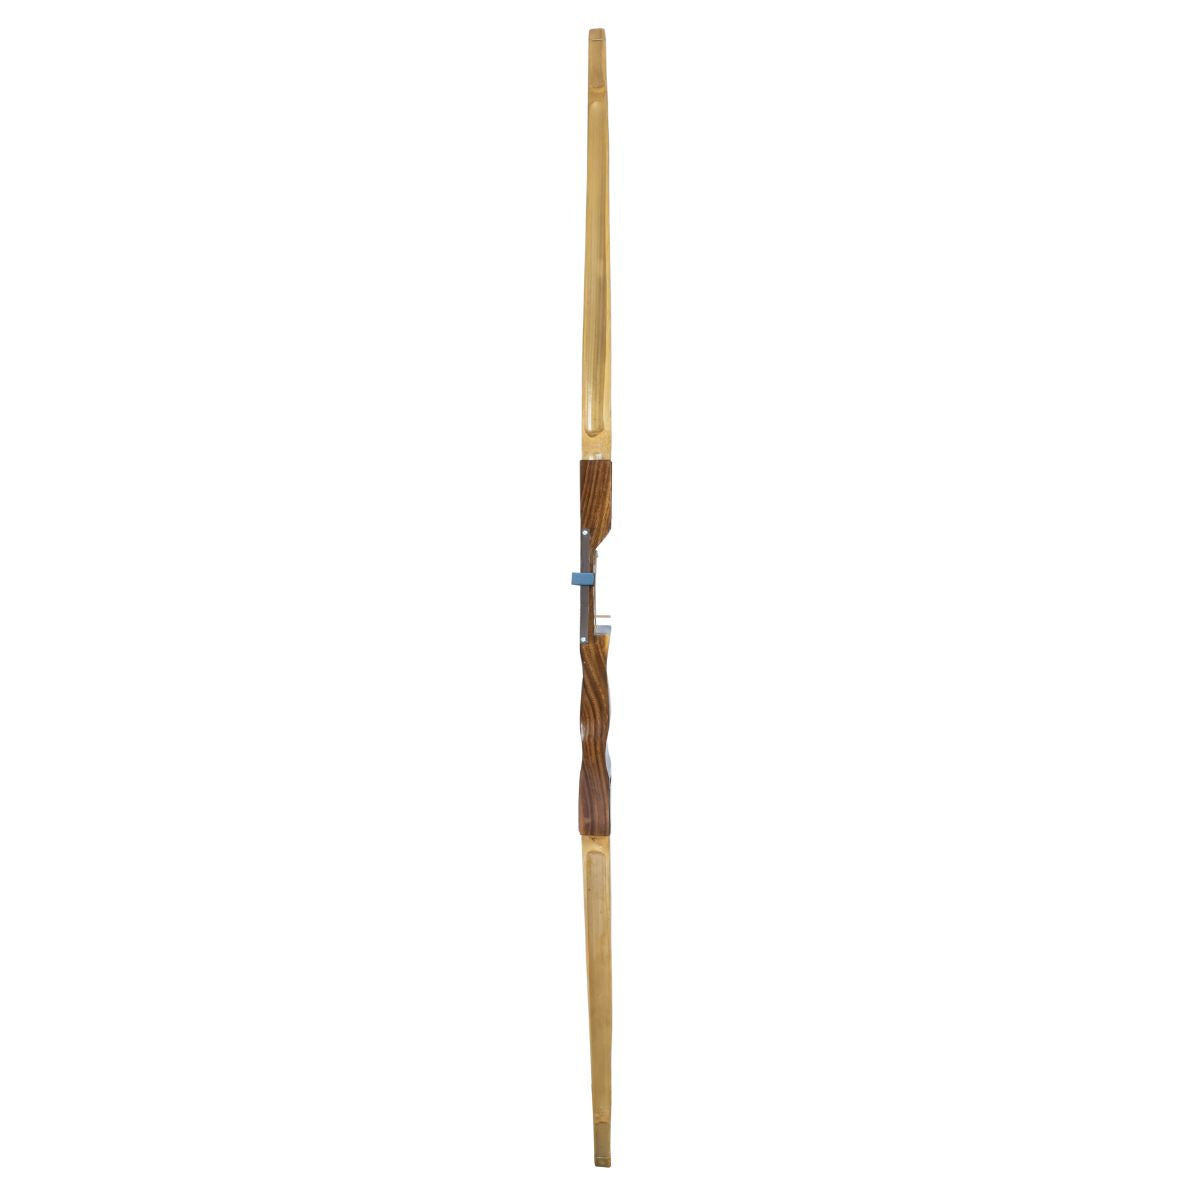 Traditional Indian Long Bow Set - A72TLB 3